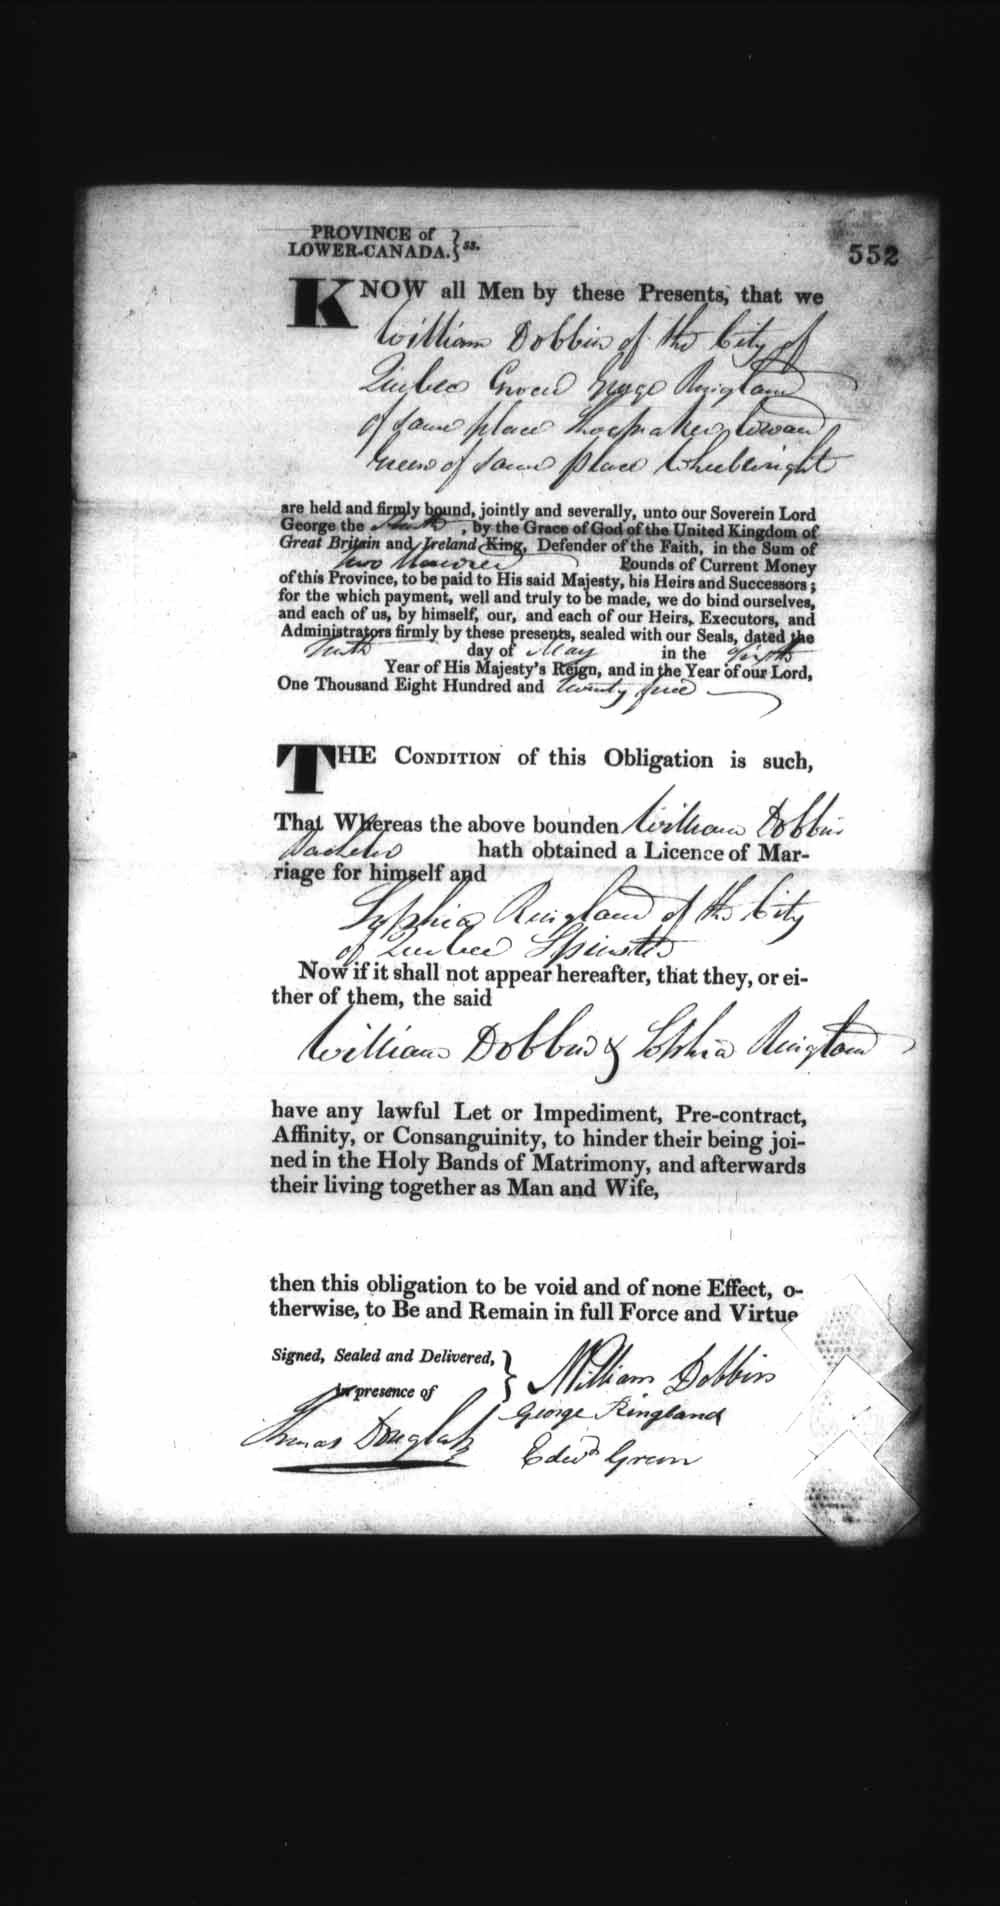 Digitized page of Upper and Lower Canada Marriage Bonds (1779-1865) for Image No.: e008236541